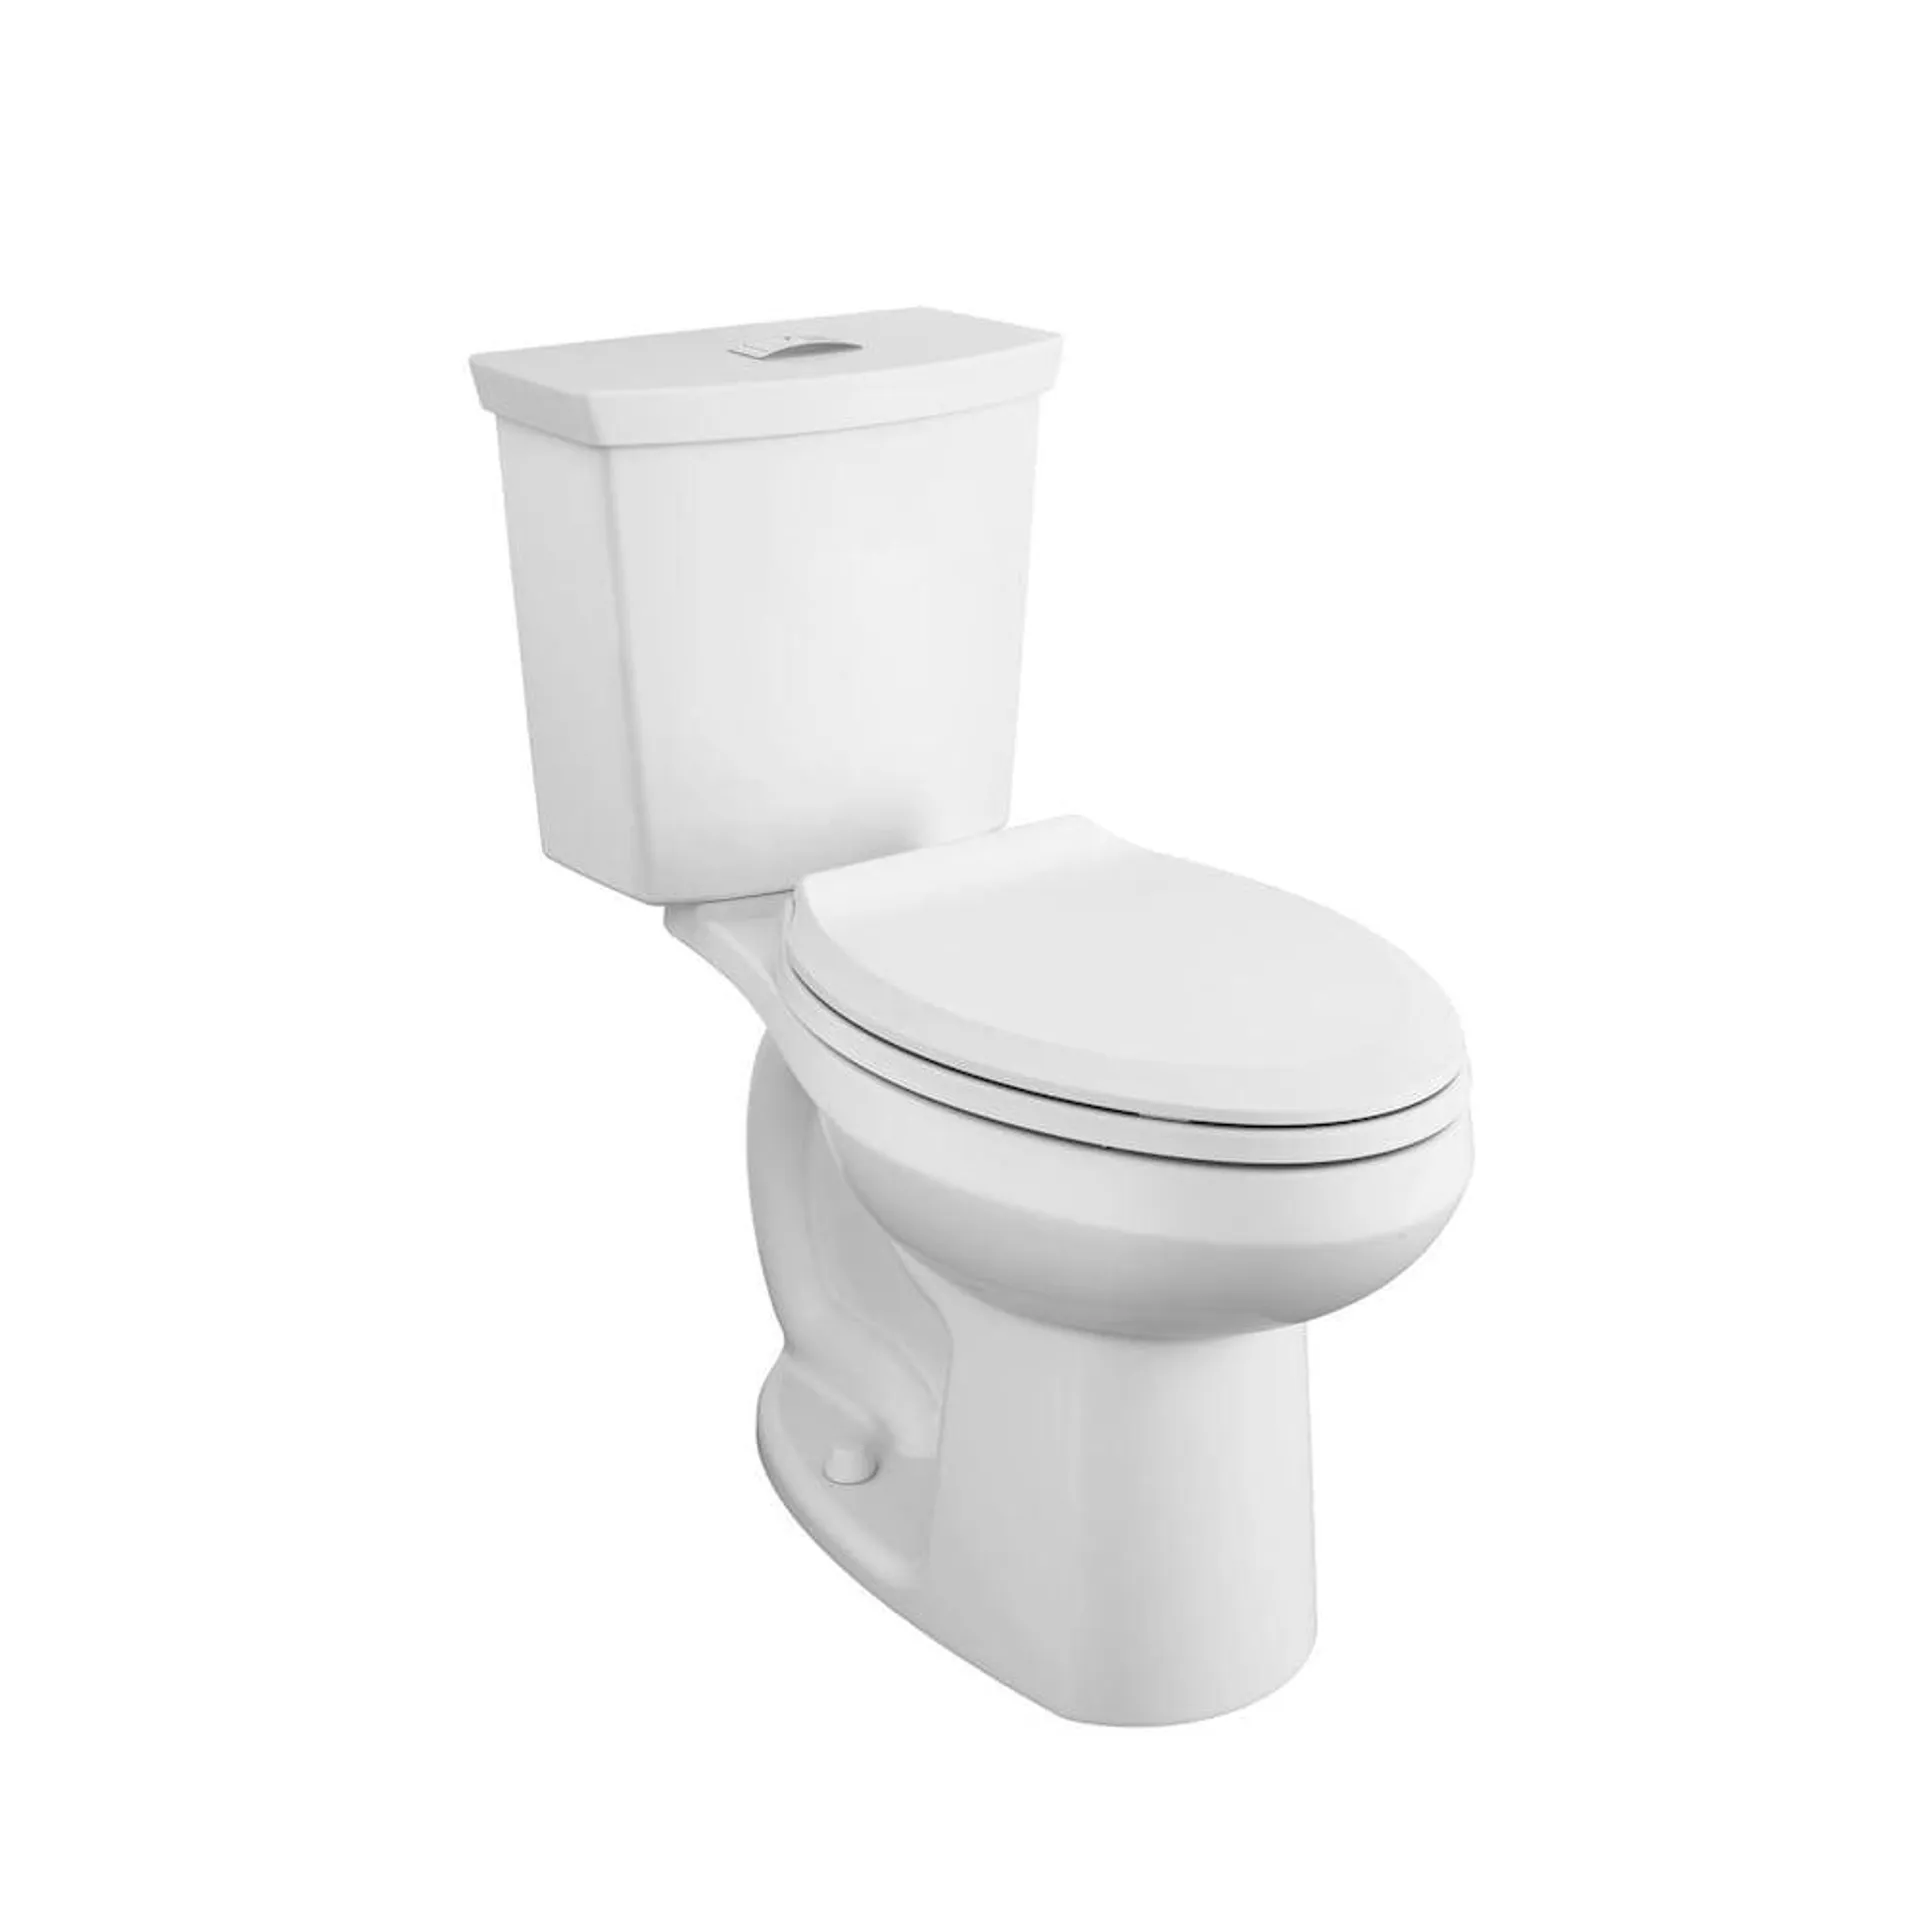 Cadet 3 3.8/6.0L Dual Flush Right Height Elongated 2-Piece Toilet in White with Lined Tank